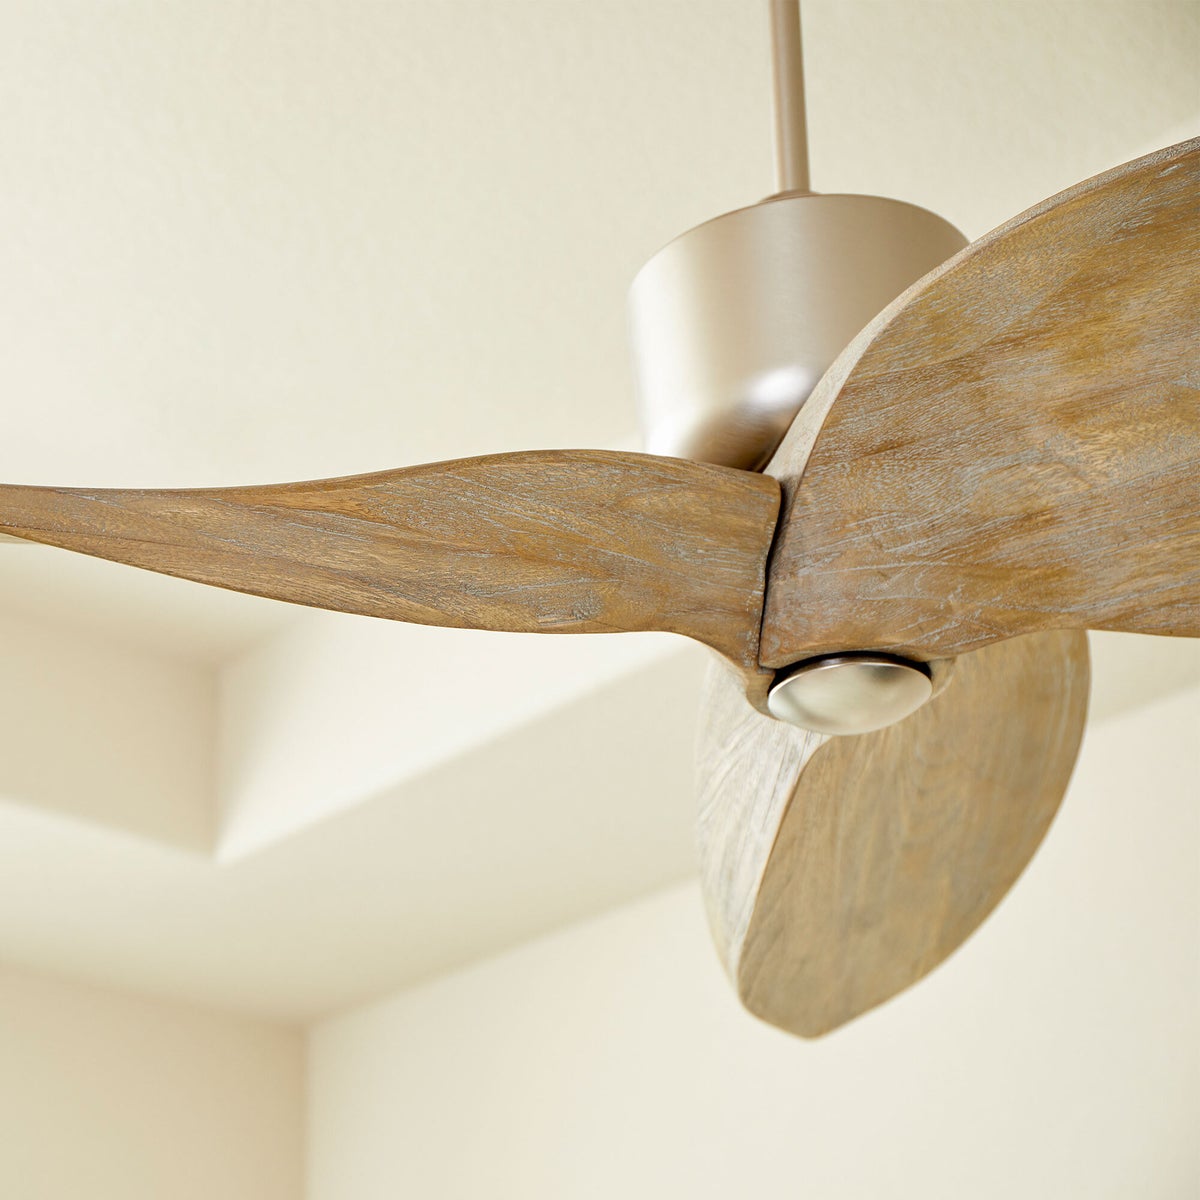 Contemporary Ceiling Fan with Wooden Blades, Distressed Finish. 52" Blade Sweep, 45° Pitch. Weathered Oak Blades, Contrasting Motor Frame. Breezy Airflow for Boho-Chic, Eclectic, or Modern Farmhouse Spaces. Quorum International DC-125NS-30, UL Listed, Dry Location. 18.5"H x 52"W. Limited Lifetime Warranty.